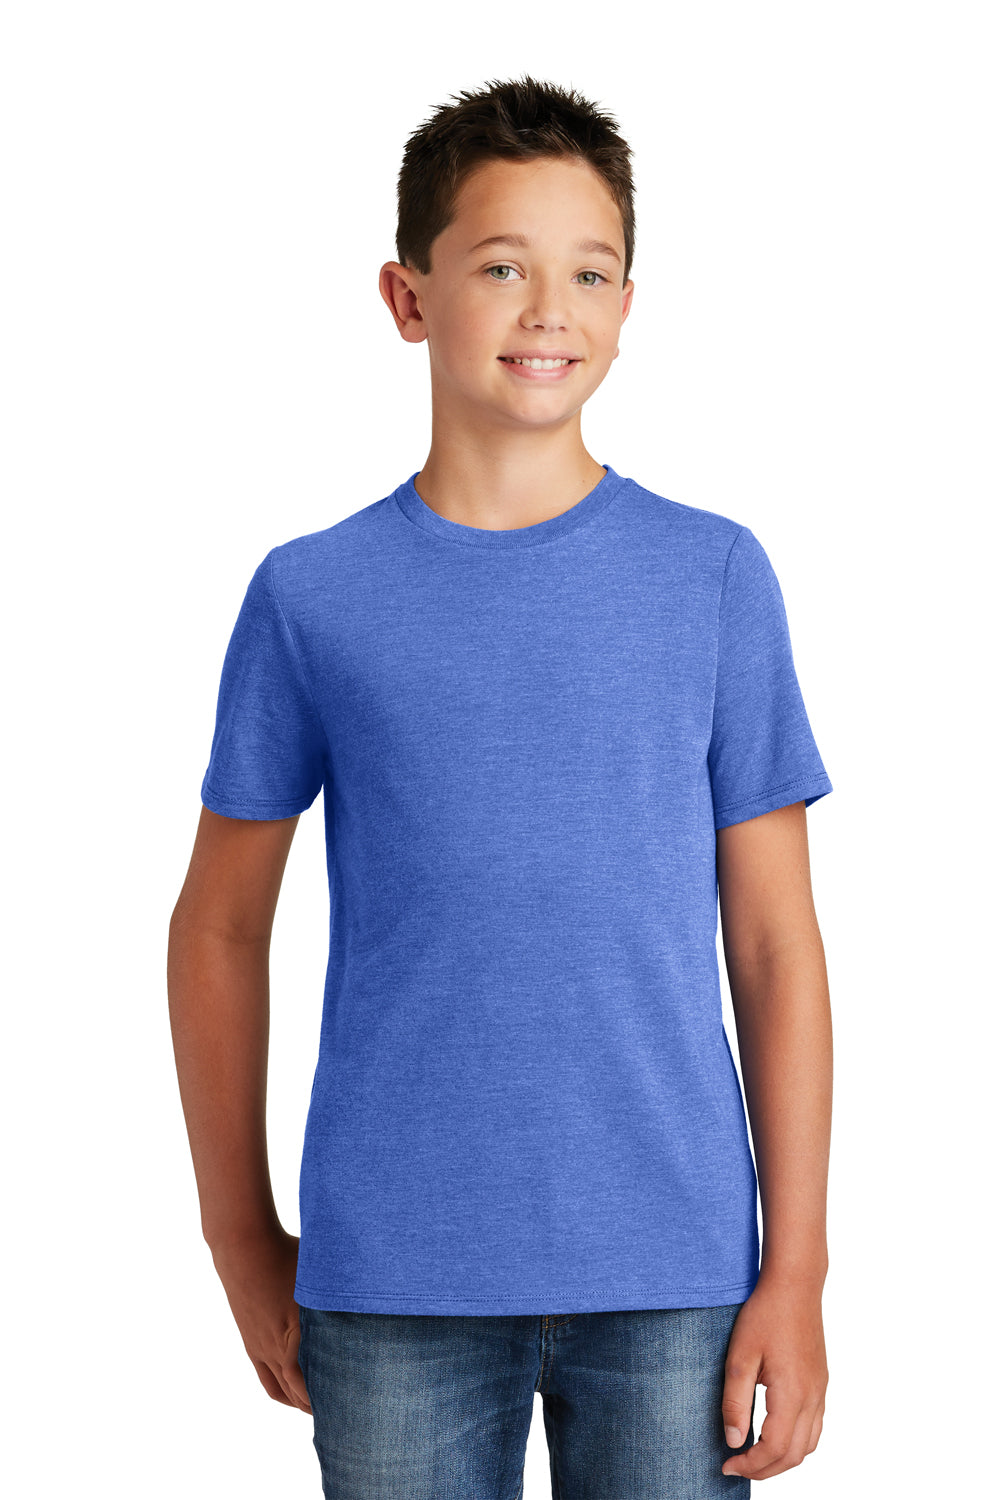 District DT130Y Youth Perfect Tri Short Sleeve Crewneck T-Shirt Royal Blue Frost Front